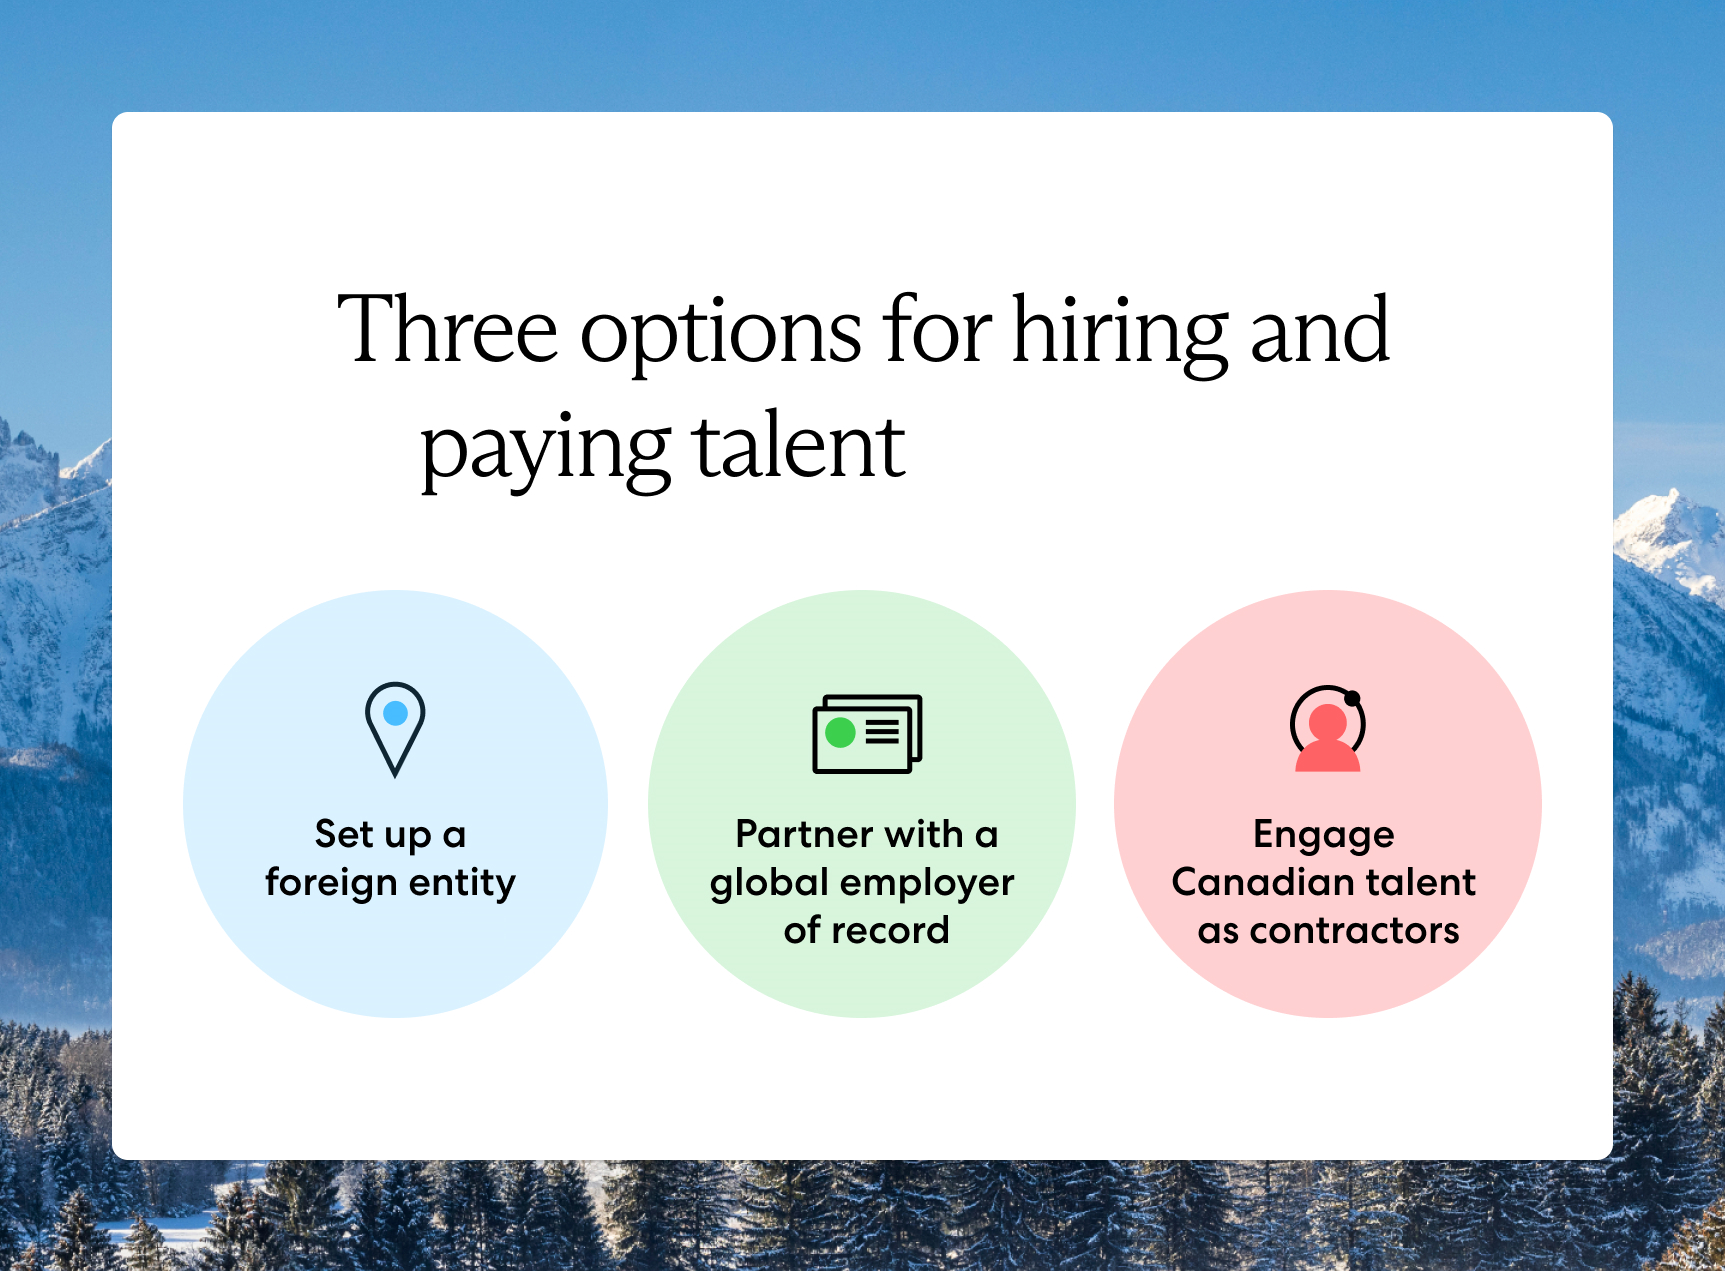 Three options for hiring and paying talent described